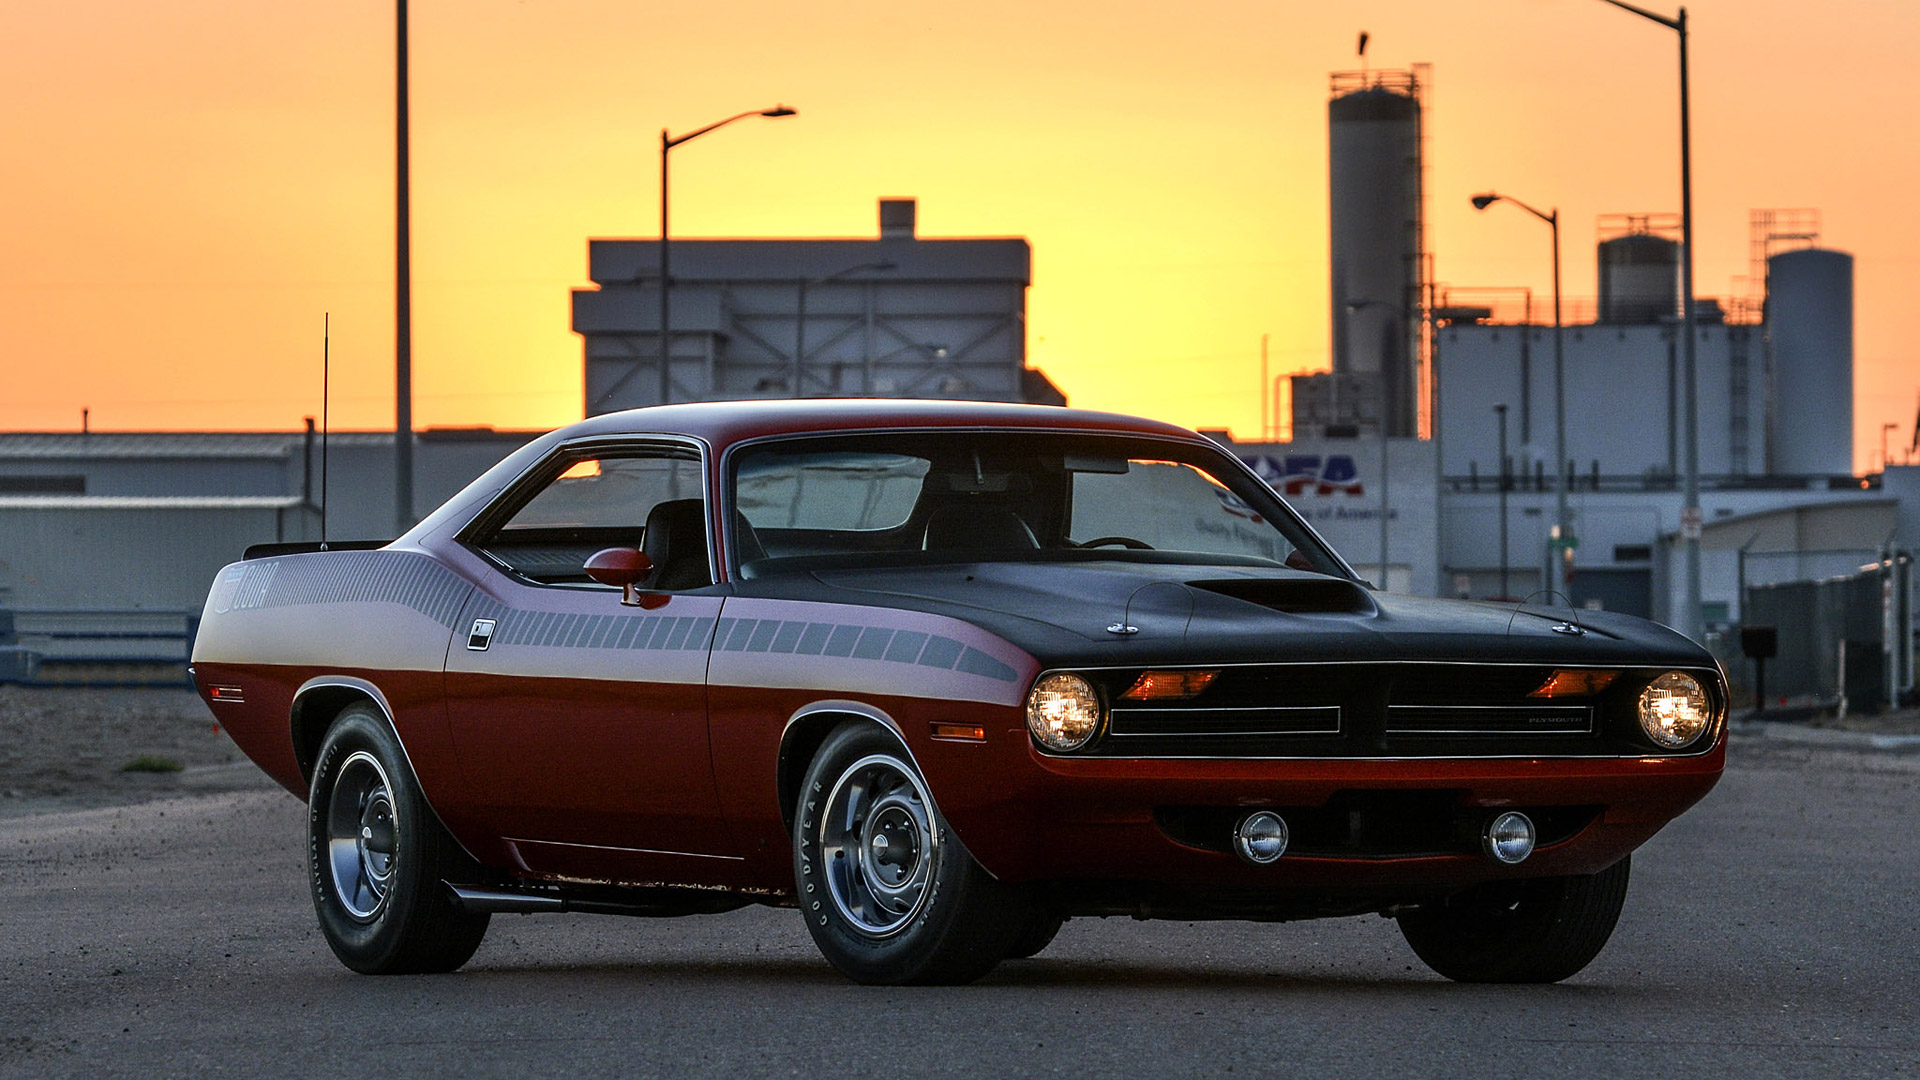 1920x1080 1970 Plymouth Barracuda Wallpapers